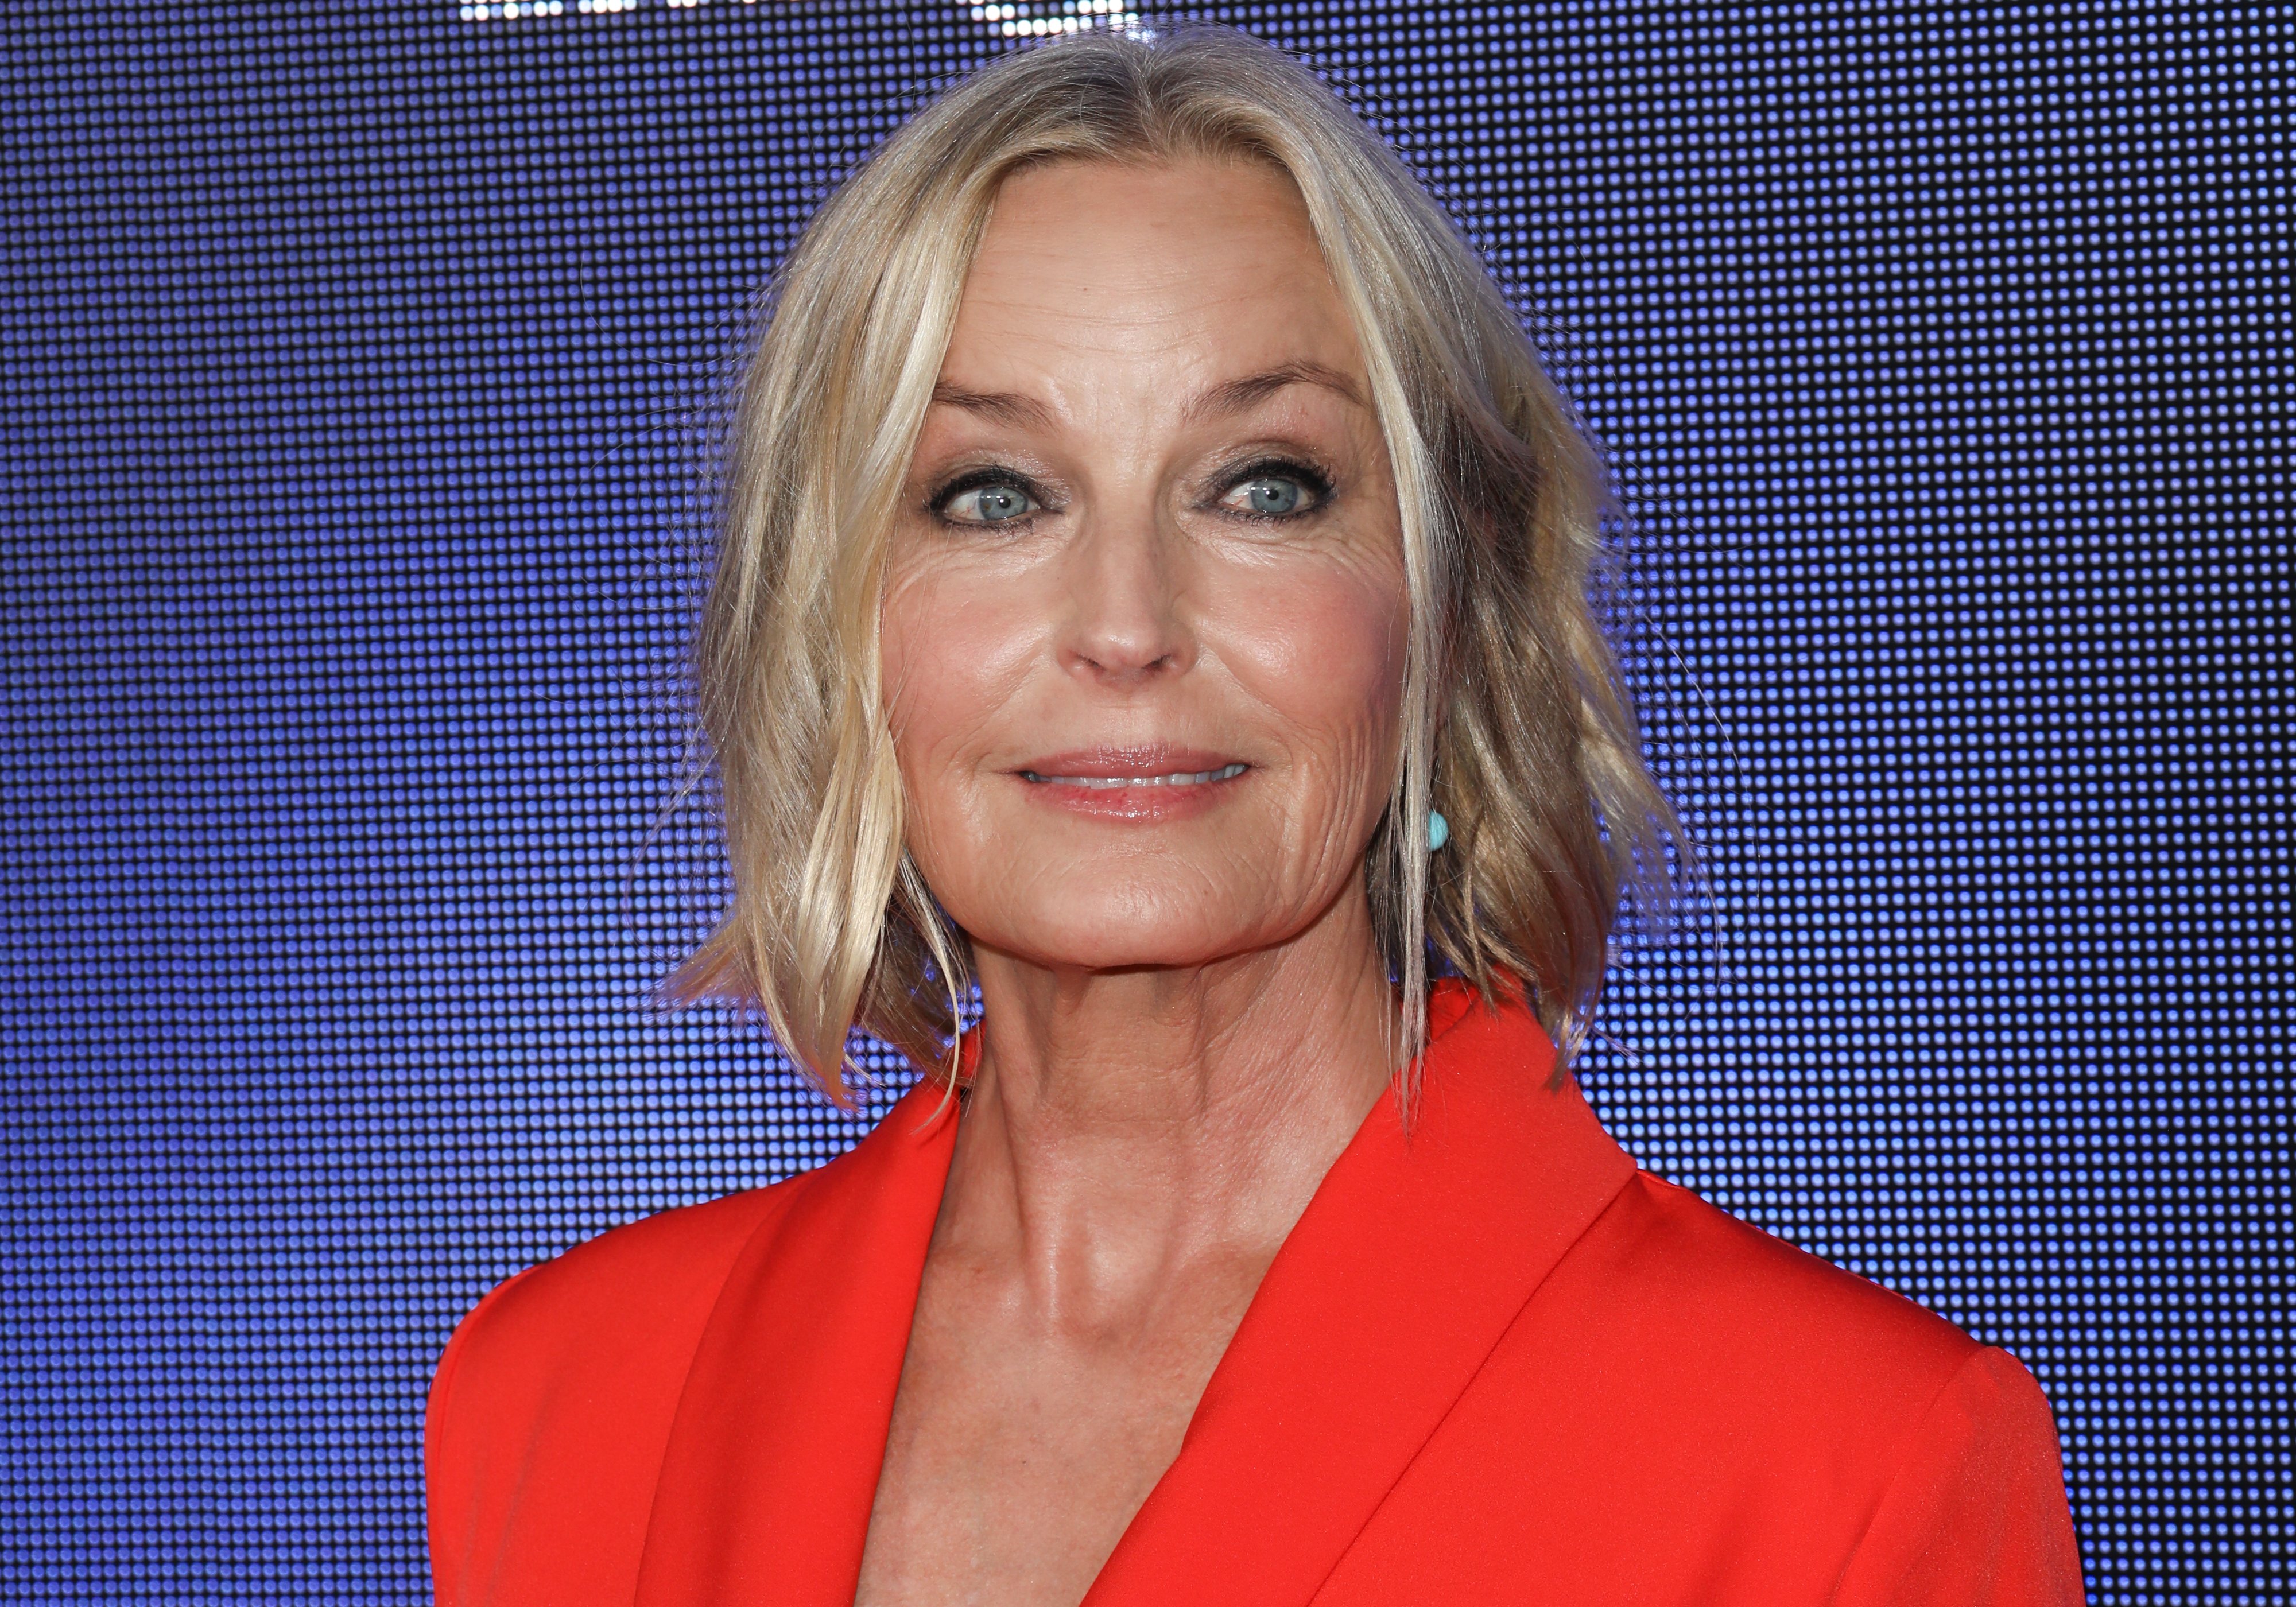 Actress Bo Derek attends the Hallmark Channel and Hallmark Movies & Mysteries summer 2019 TCA press tour event at a Private Residence on July 26, 2019, in Beverly Hills, California. | Source: Getty Images